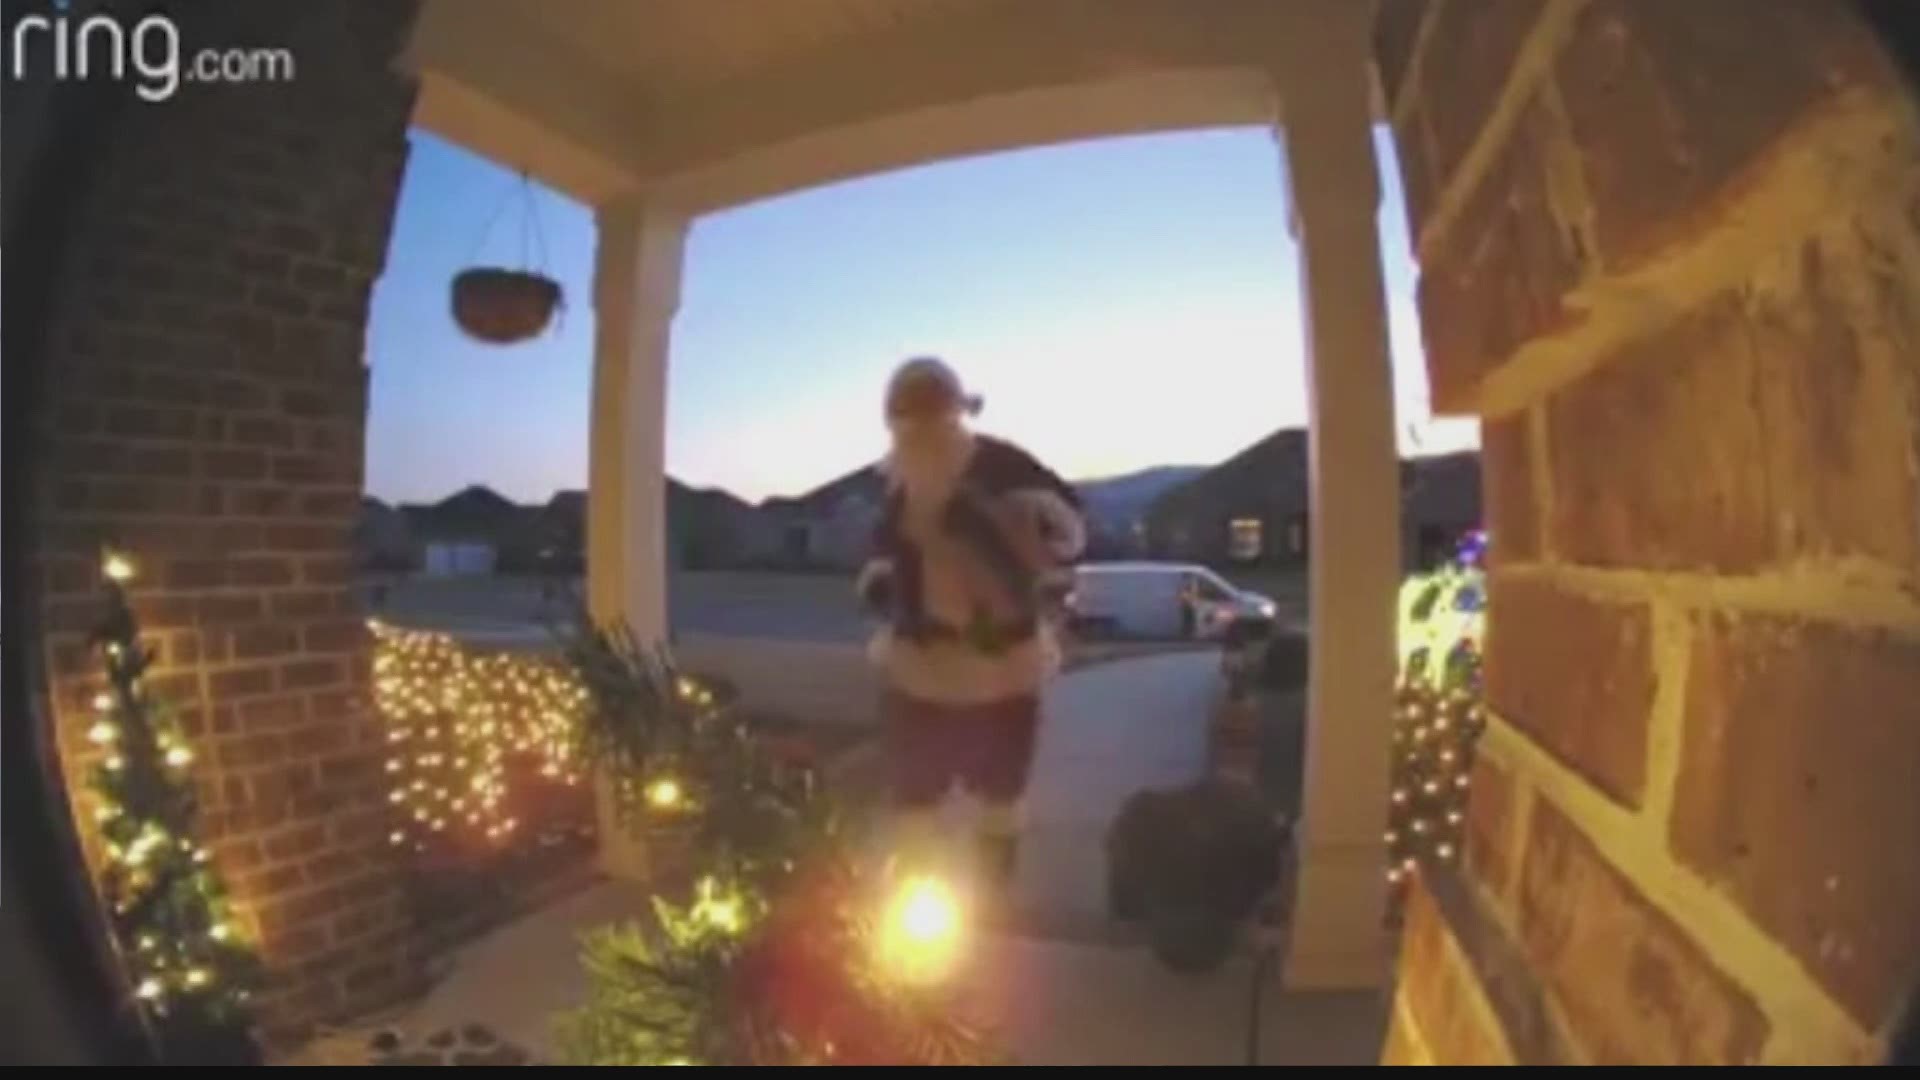 People are shocked to see just how spunky Anthony Guffey is when he drops off their packages and puts on a little show for their doorstep cameras.